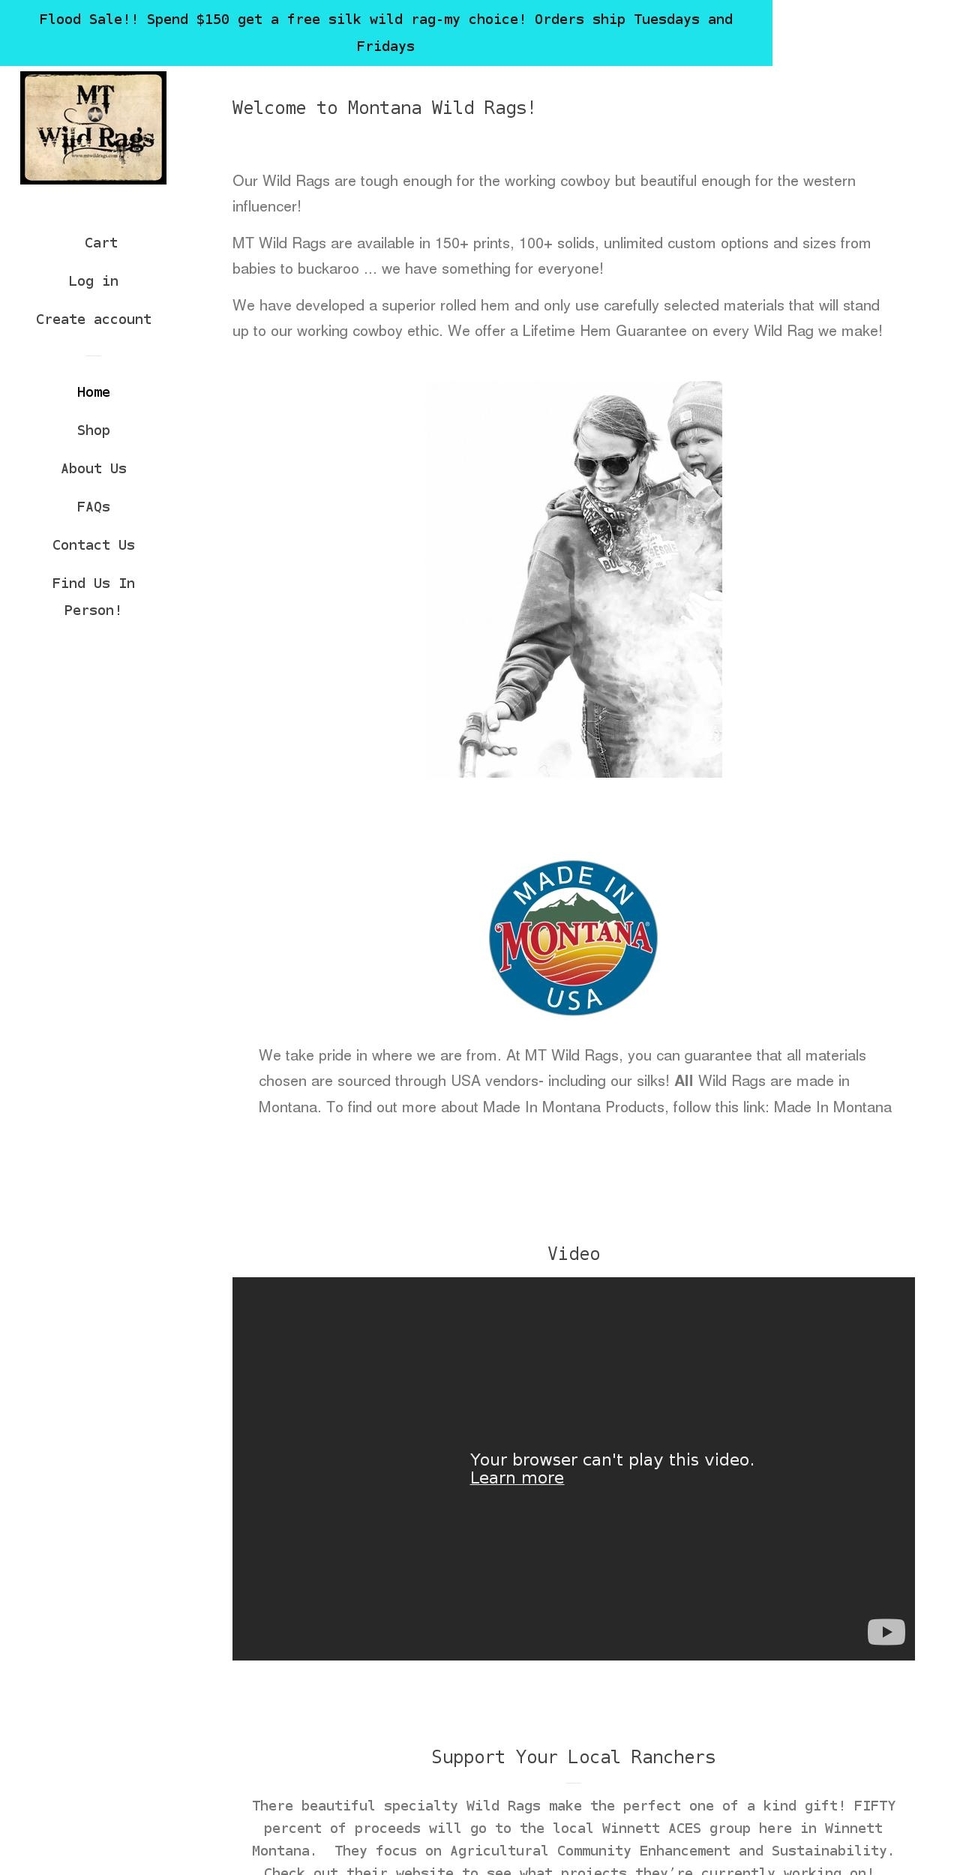 Pop with Installments message Shopify theme site example mtwildrags.com